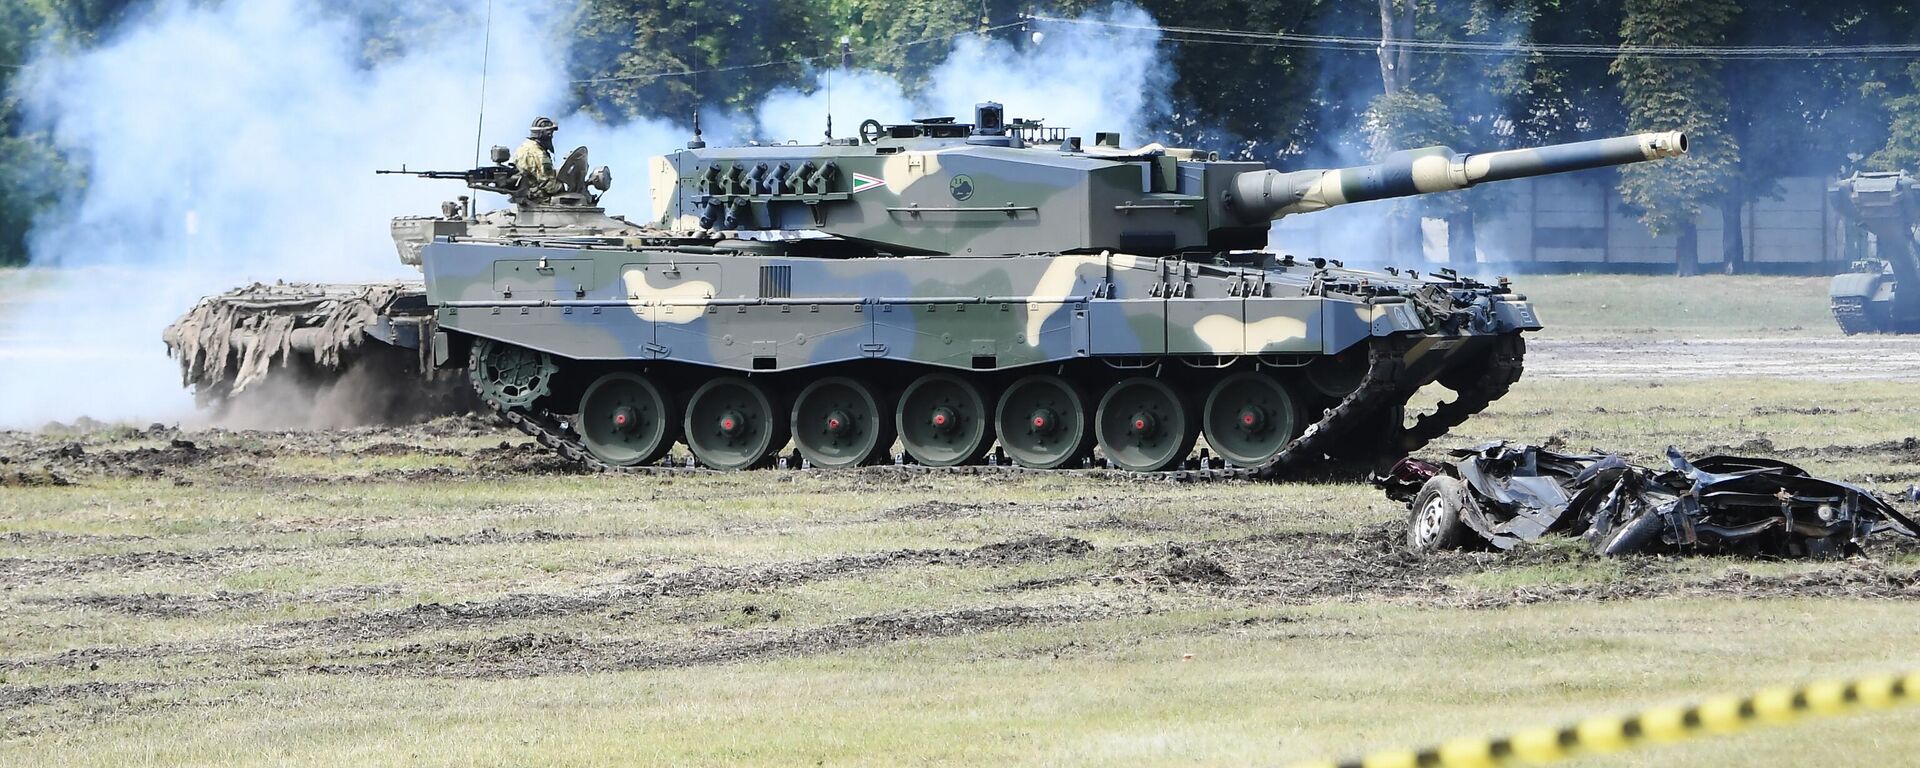 A Leopard 2/A4 battle tank rolls during a handover ceremony of tanks at the army base of Tata, Hungary, on July 24, 2020 - Sputnik International, 1920, 25.01.2023